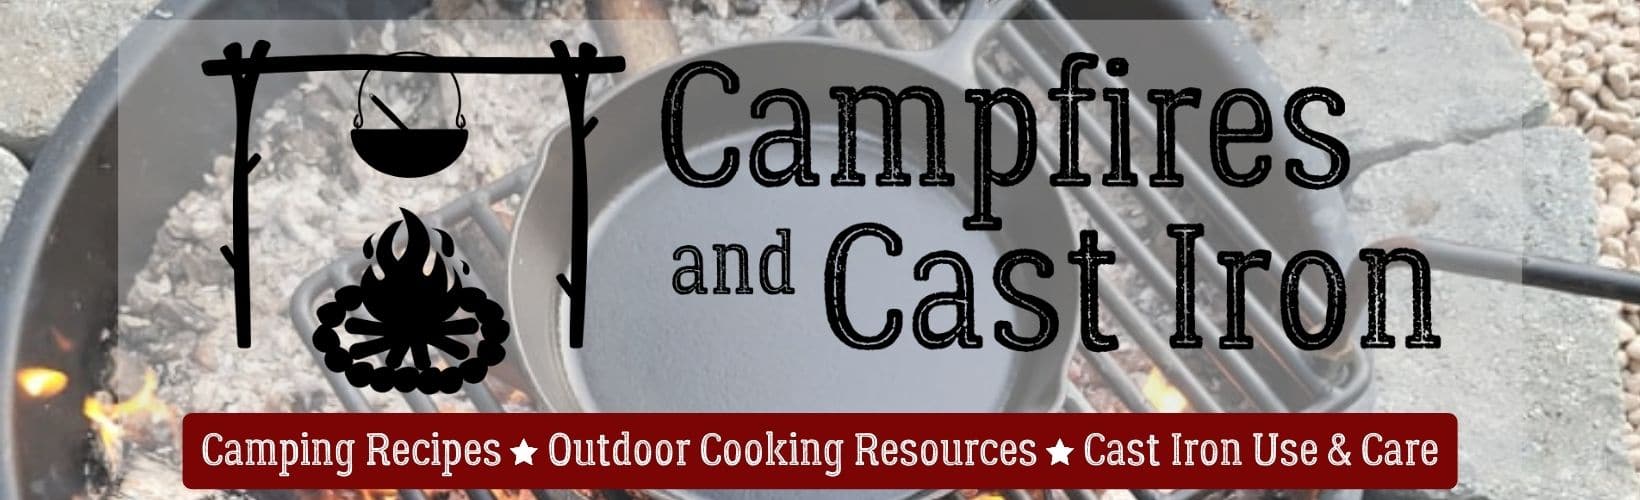 Campfires and Cast Iron Homepage Header Image